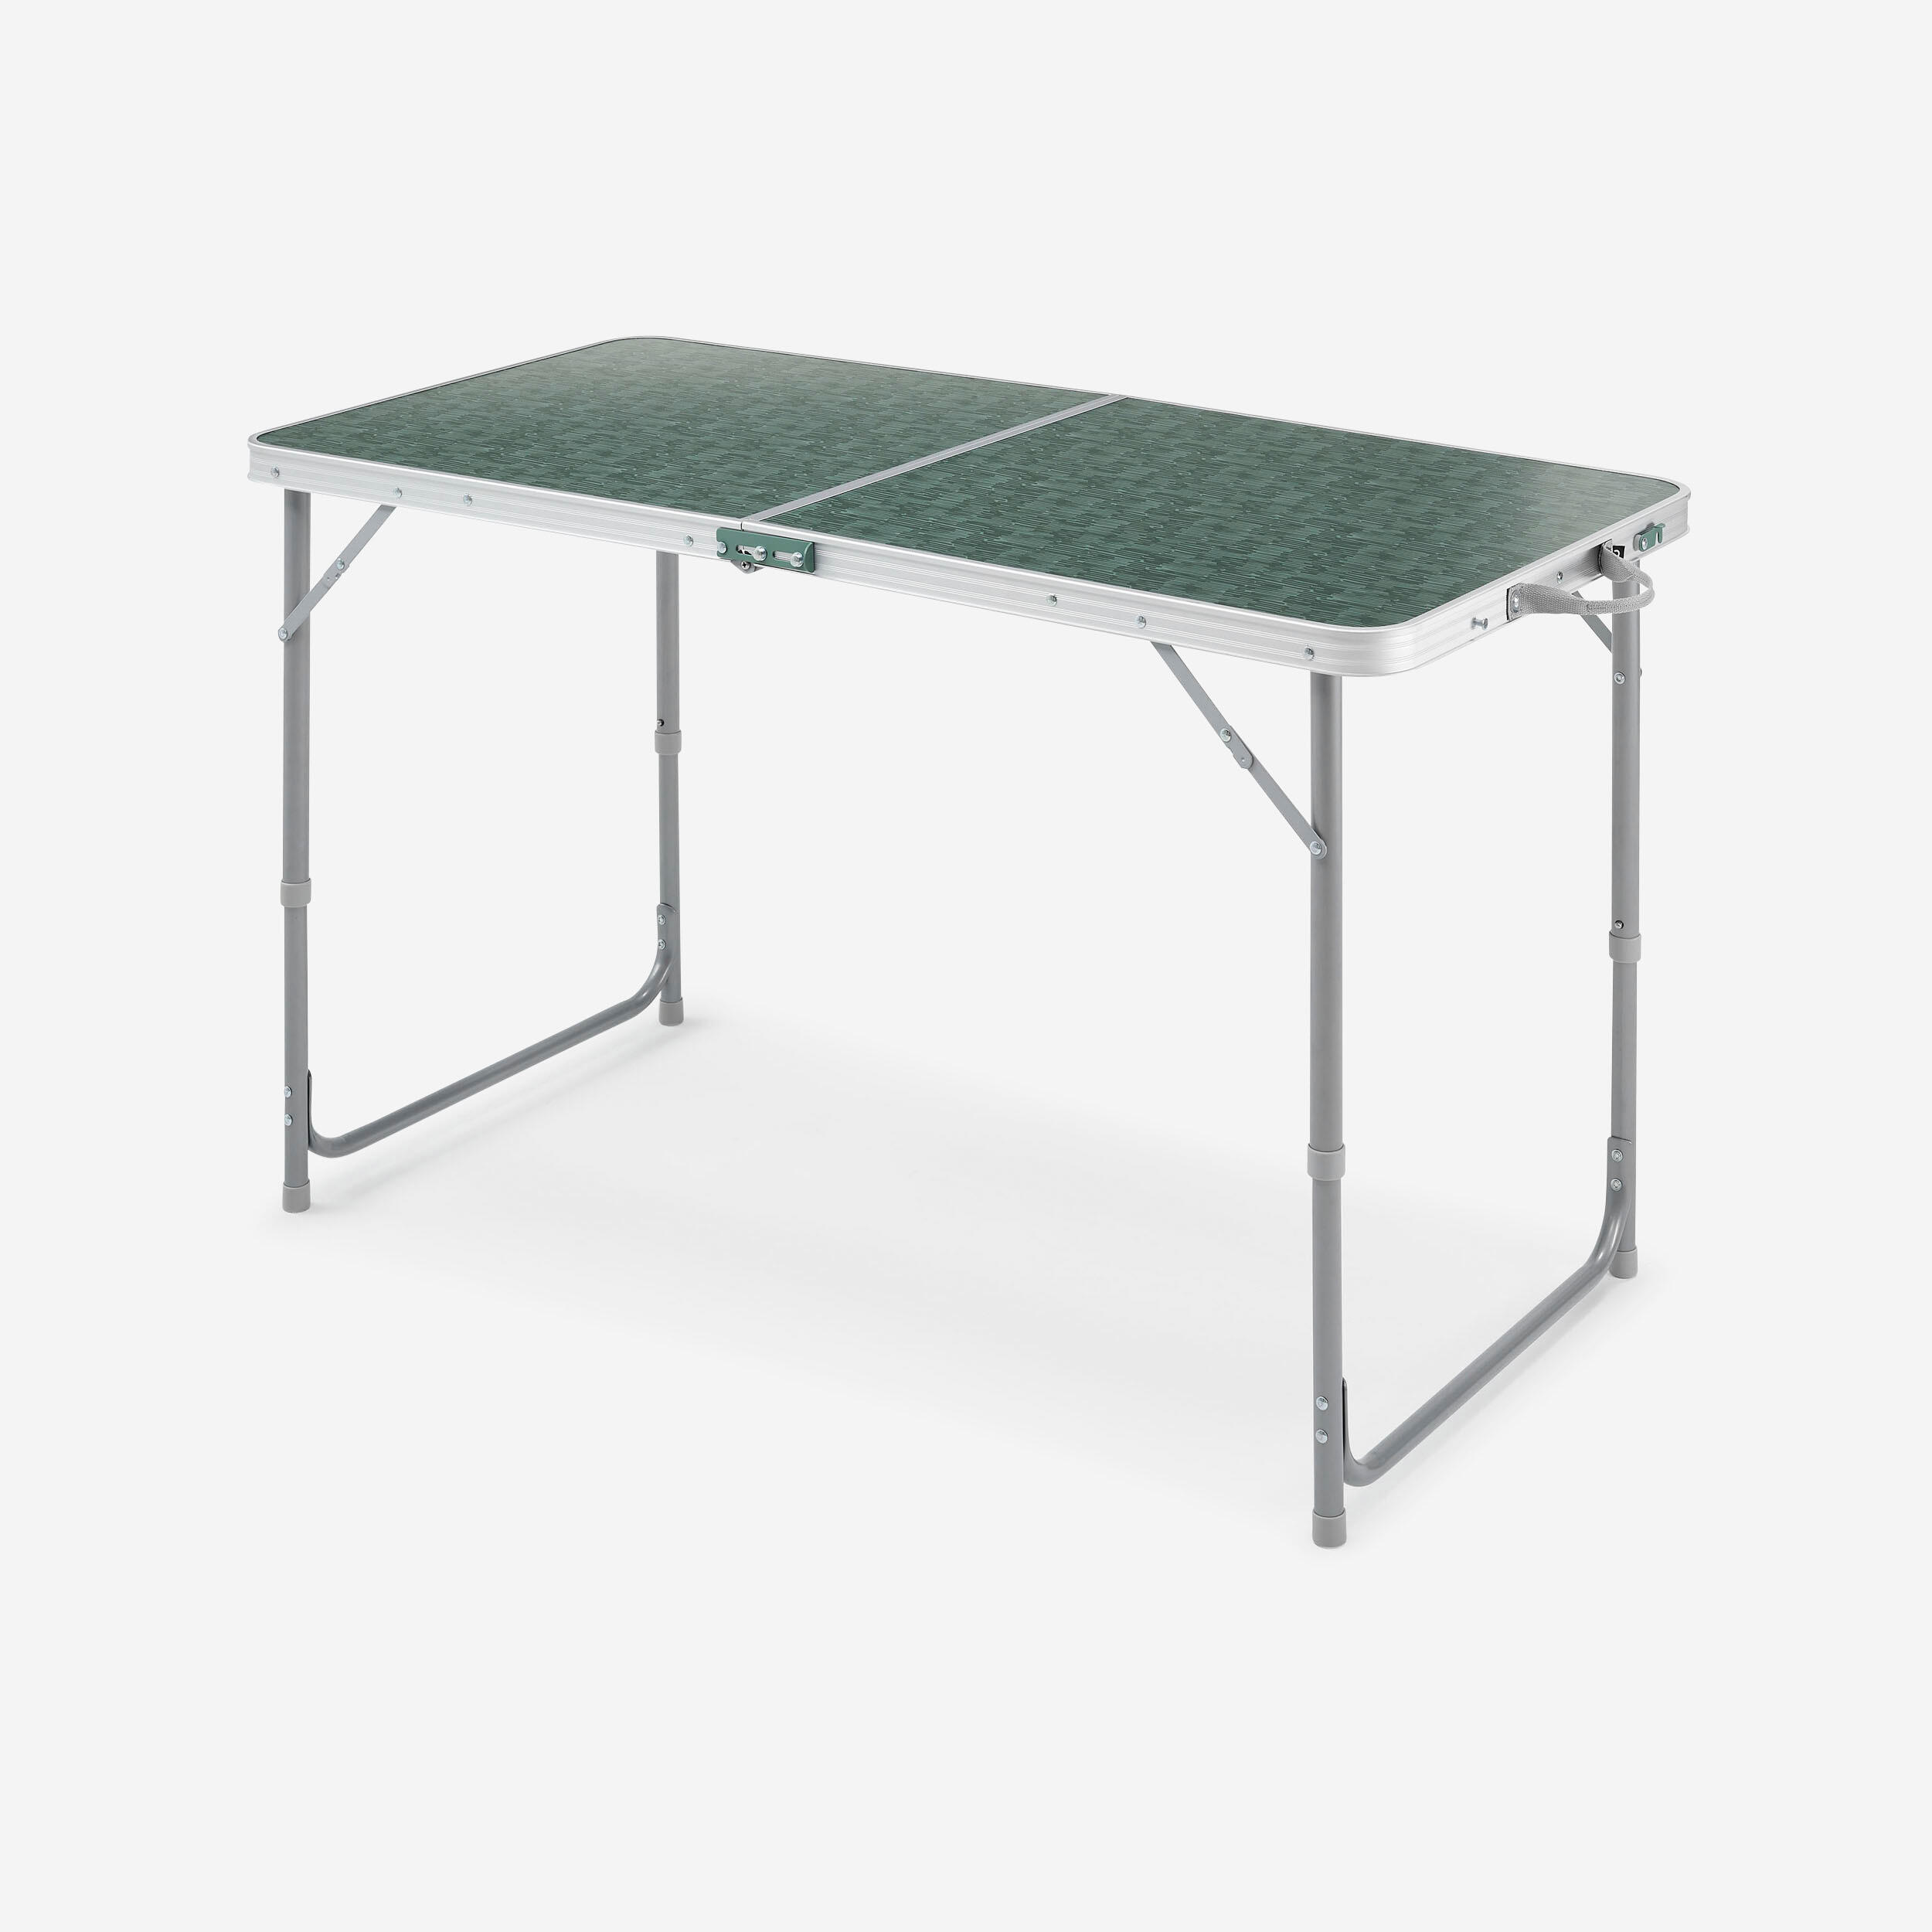 FOLDING CAMPING TABLE - 4 TO 6 PEOPLE 1/10